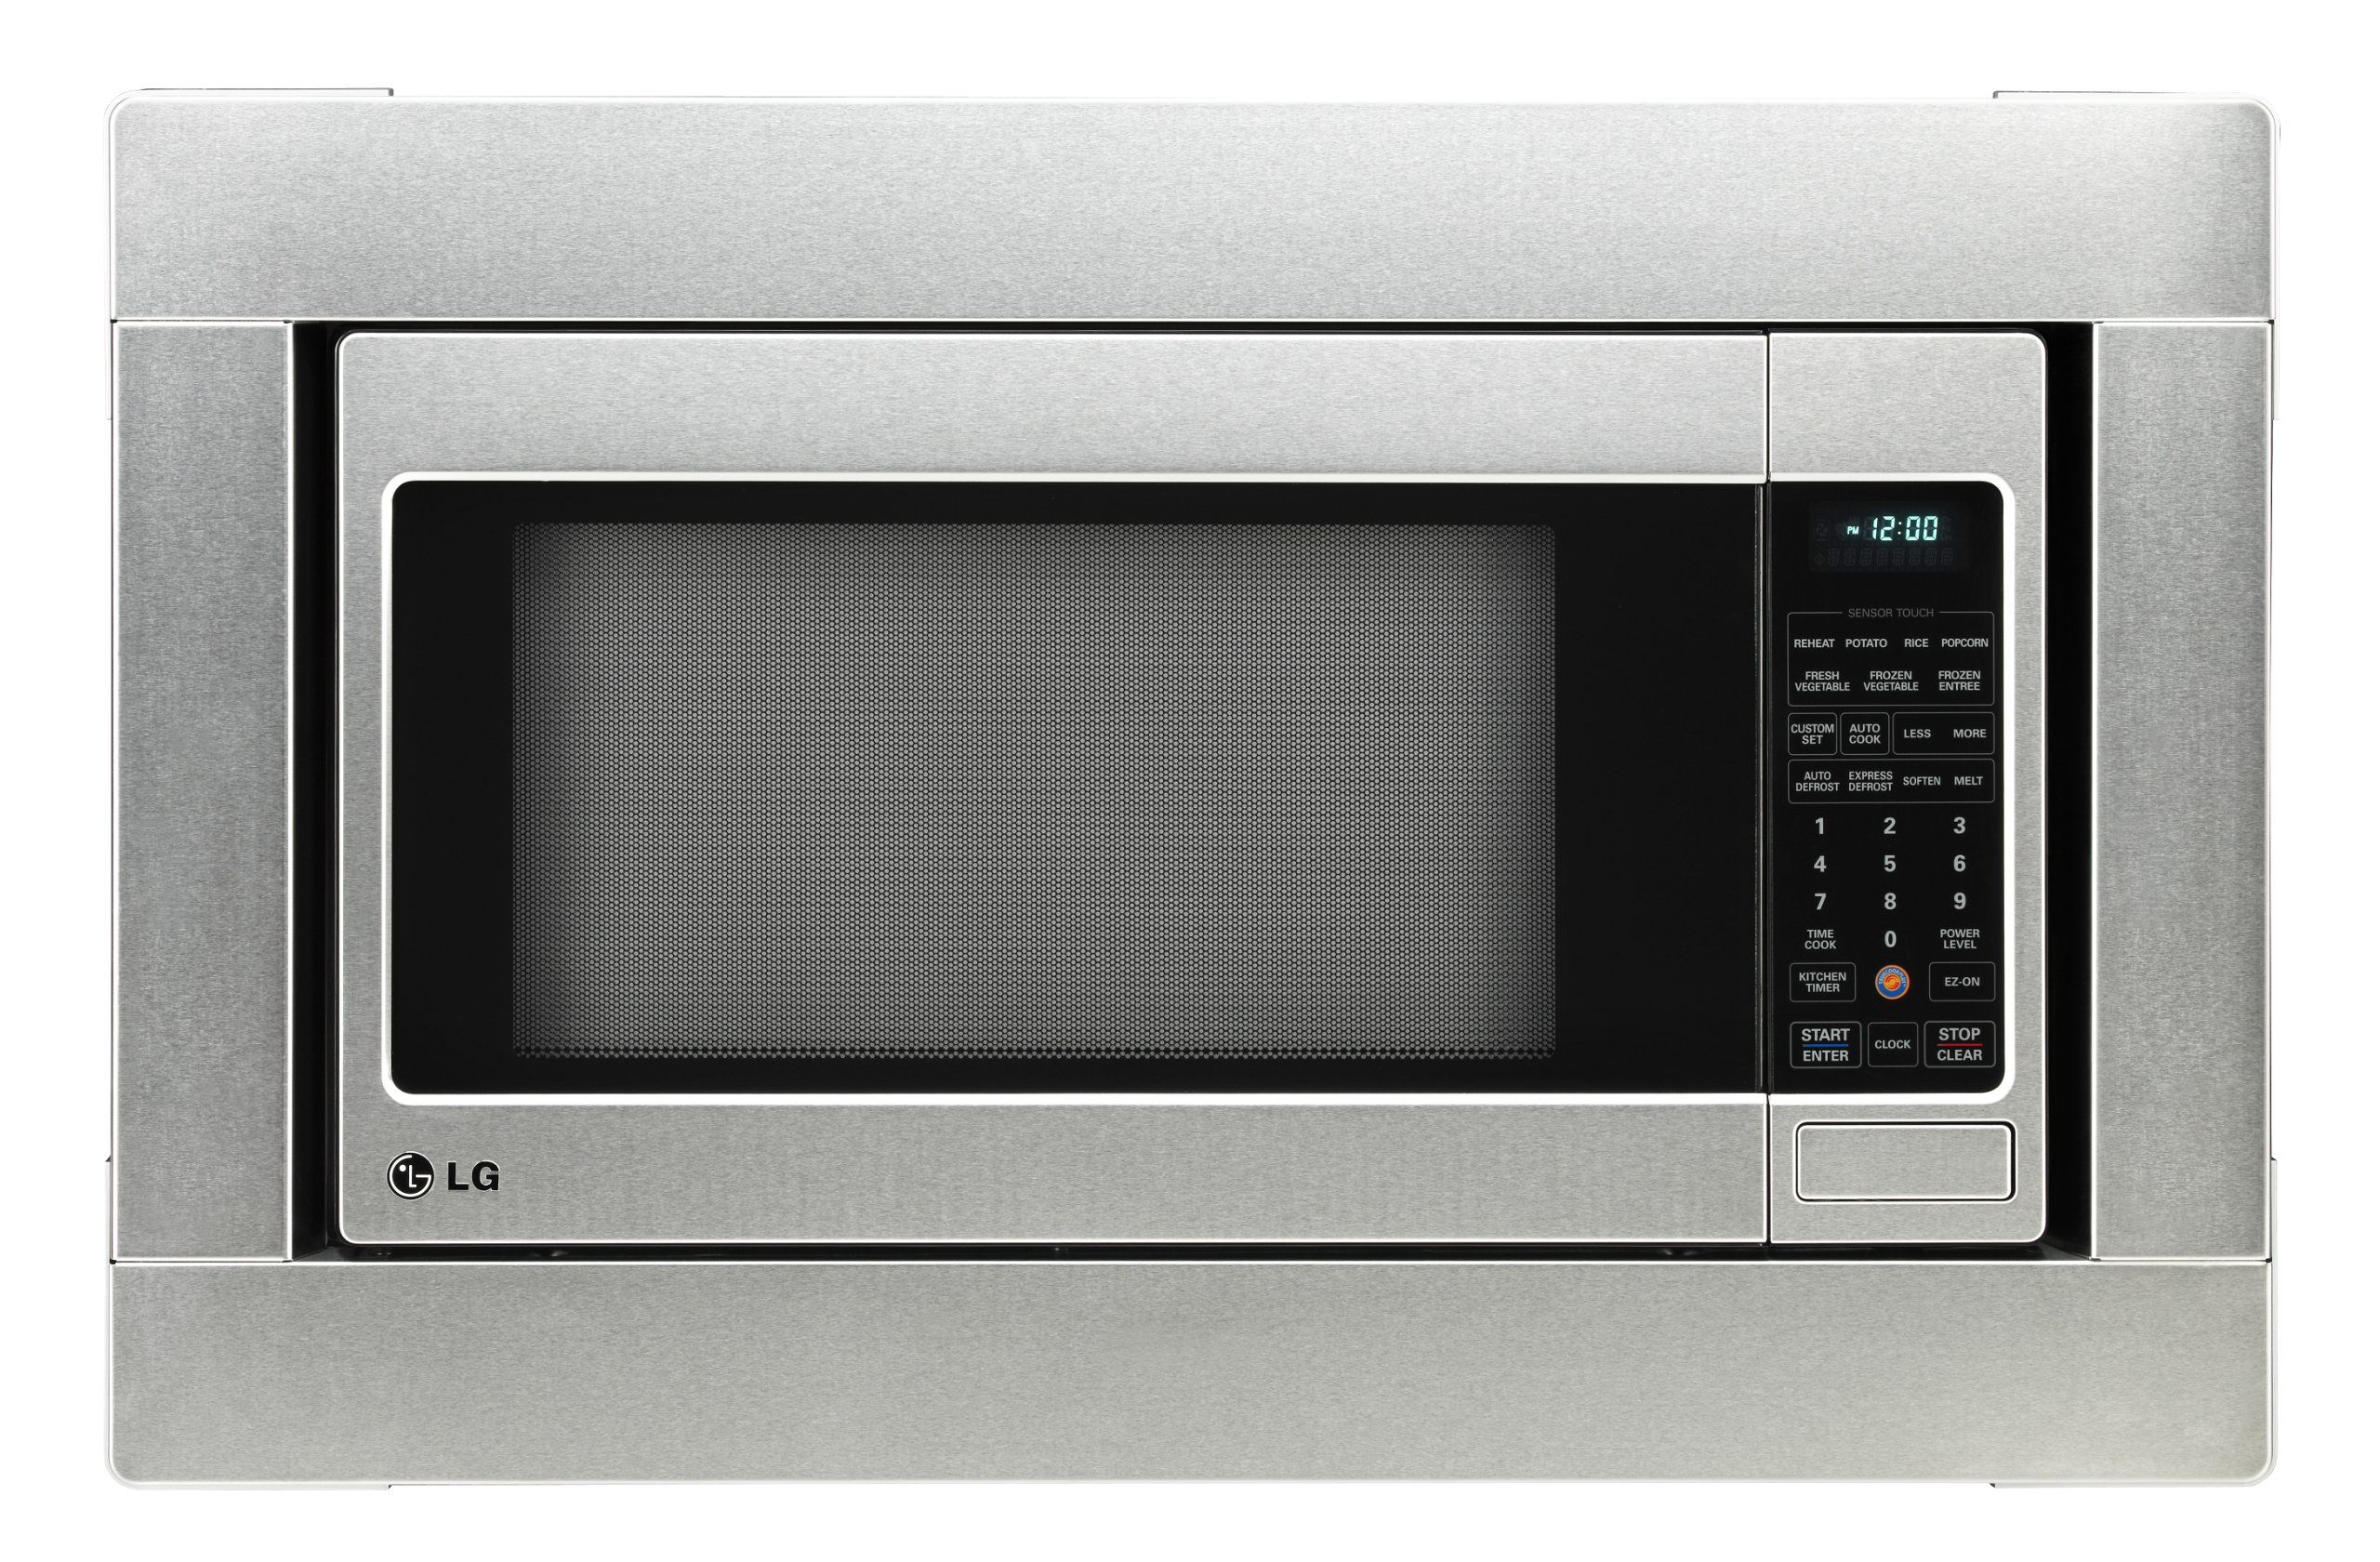 Modern Design, Superior Performance: Introducing the LG LCRT2010ST Microwave Oven